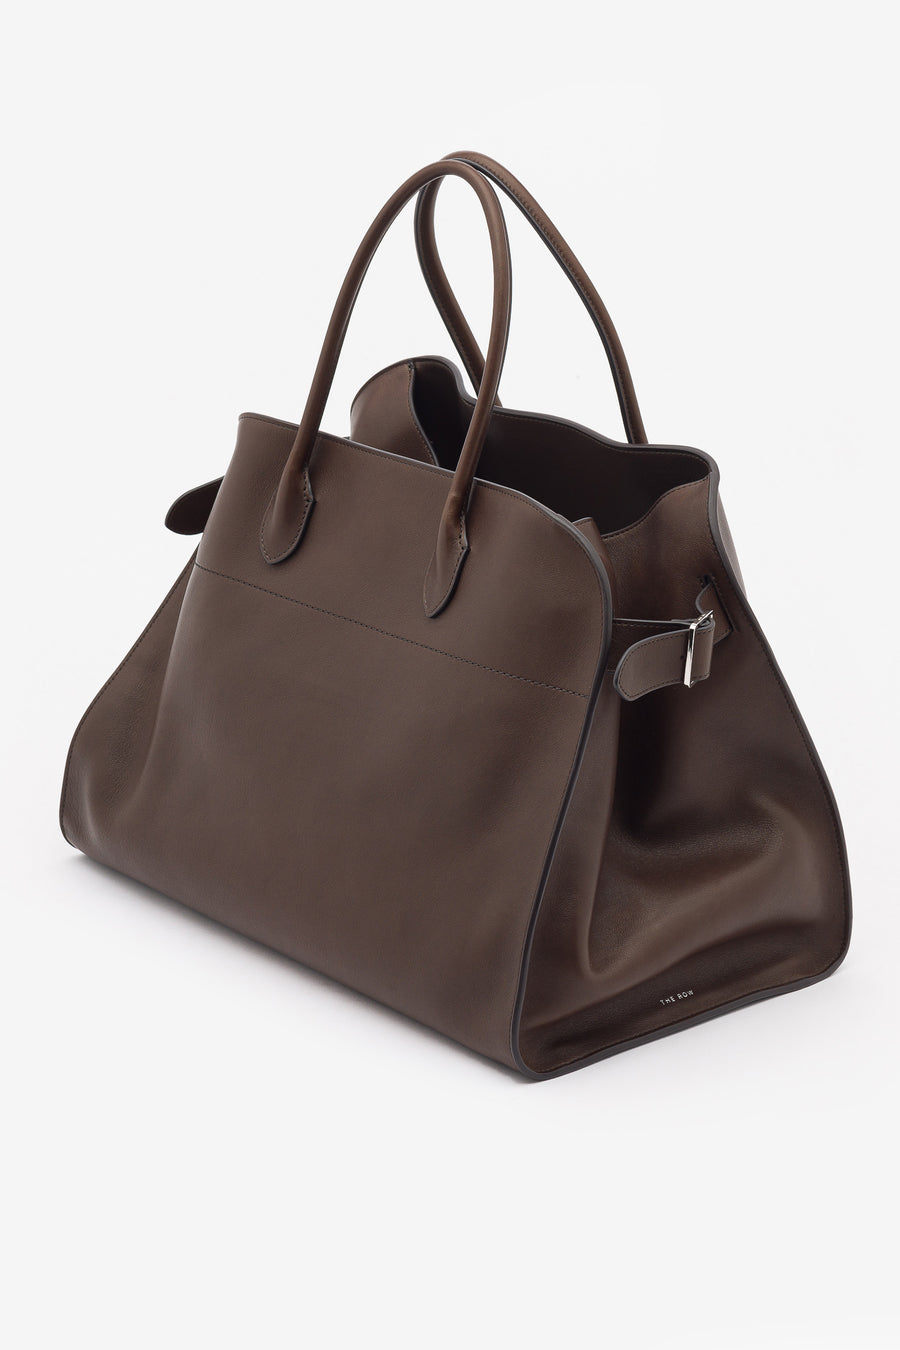 The Row Margaux 17 Buckled Leather Tote